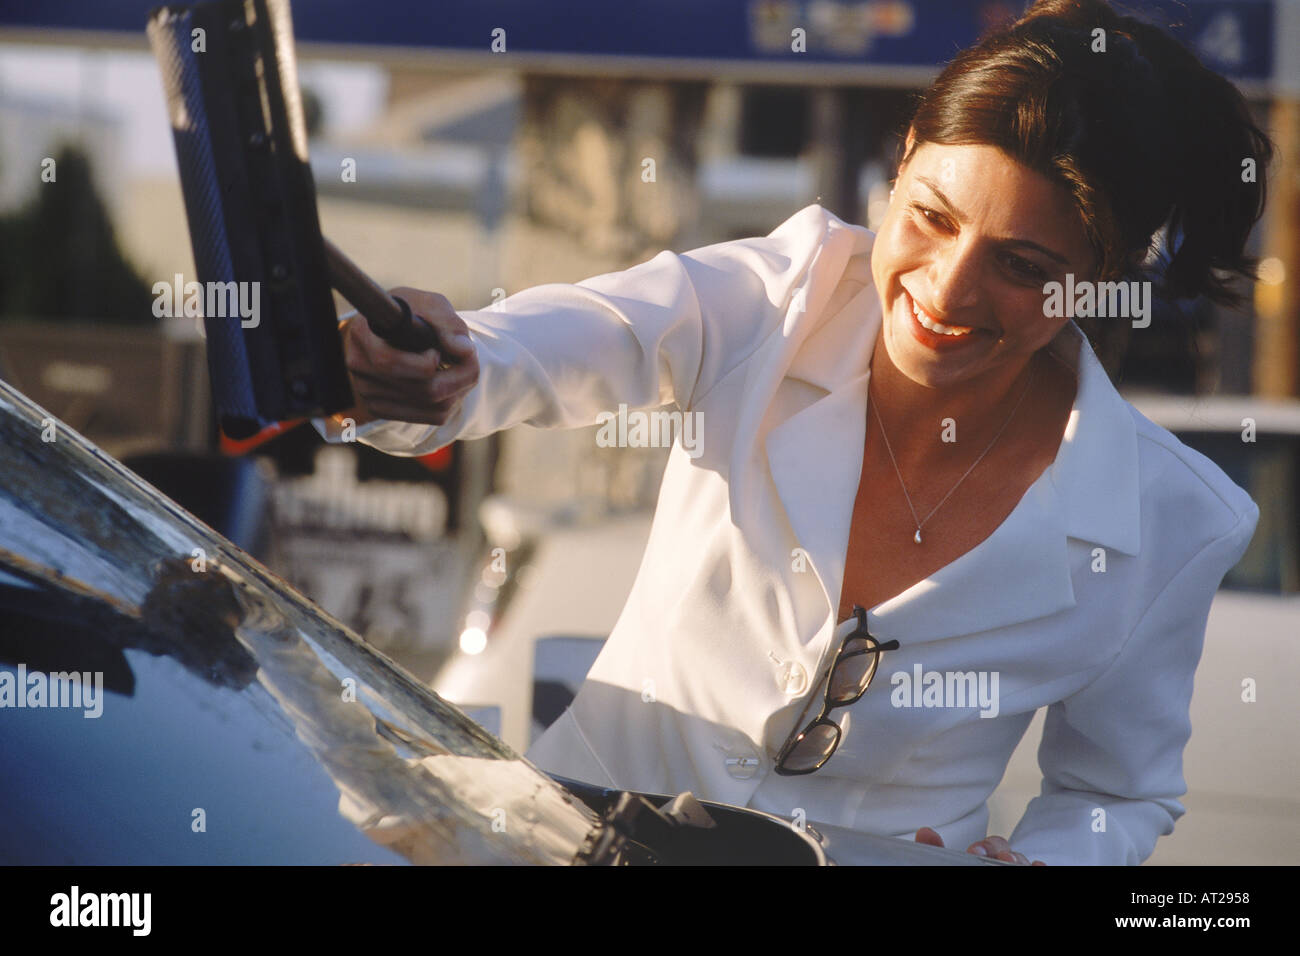 Woman in business suit cleaning windshield with handle wipe at self service gas station in USA Stock Photo